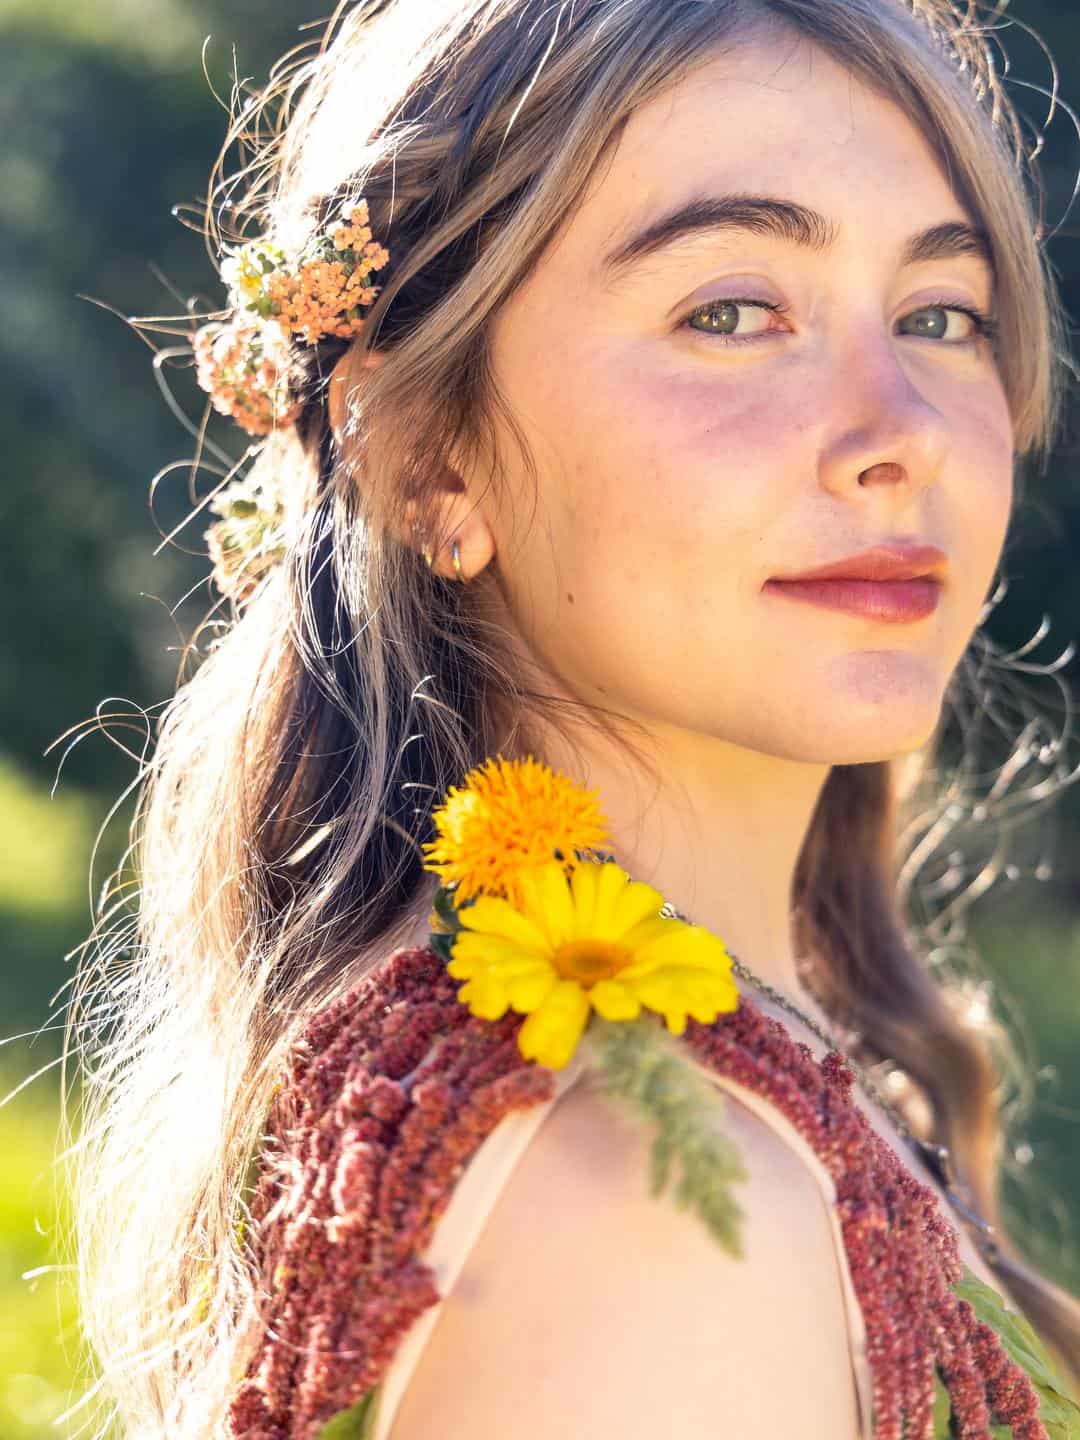 girl with flowers in her hair and a dress made of flowers